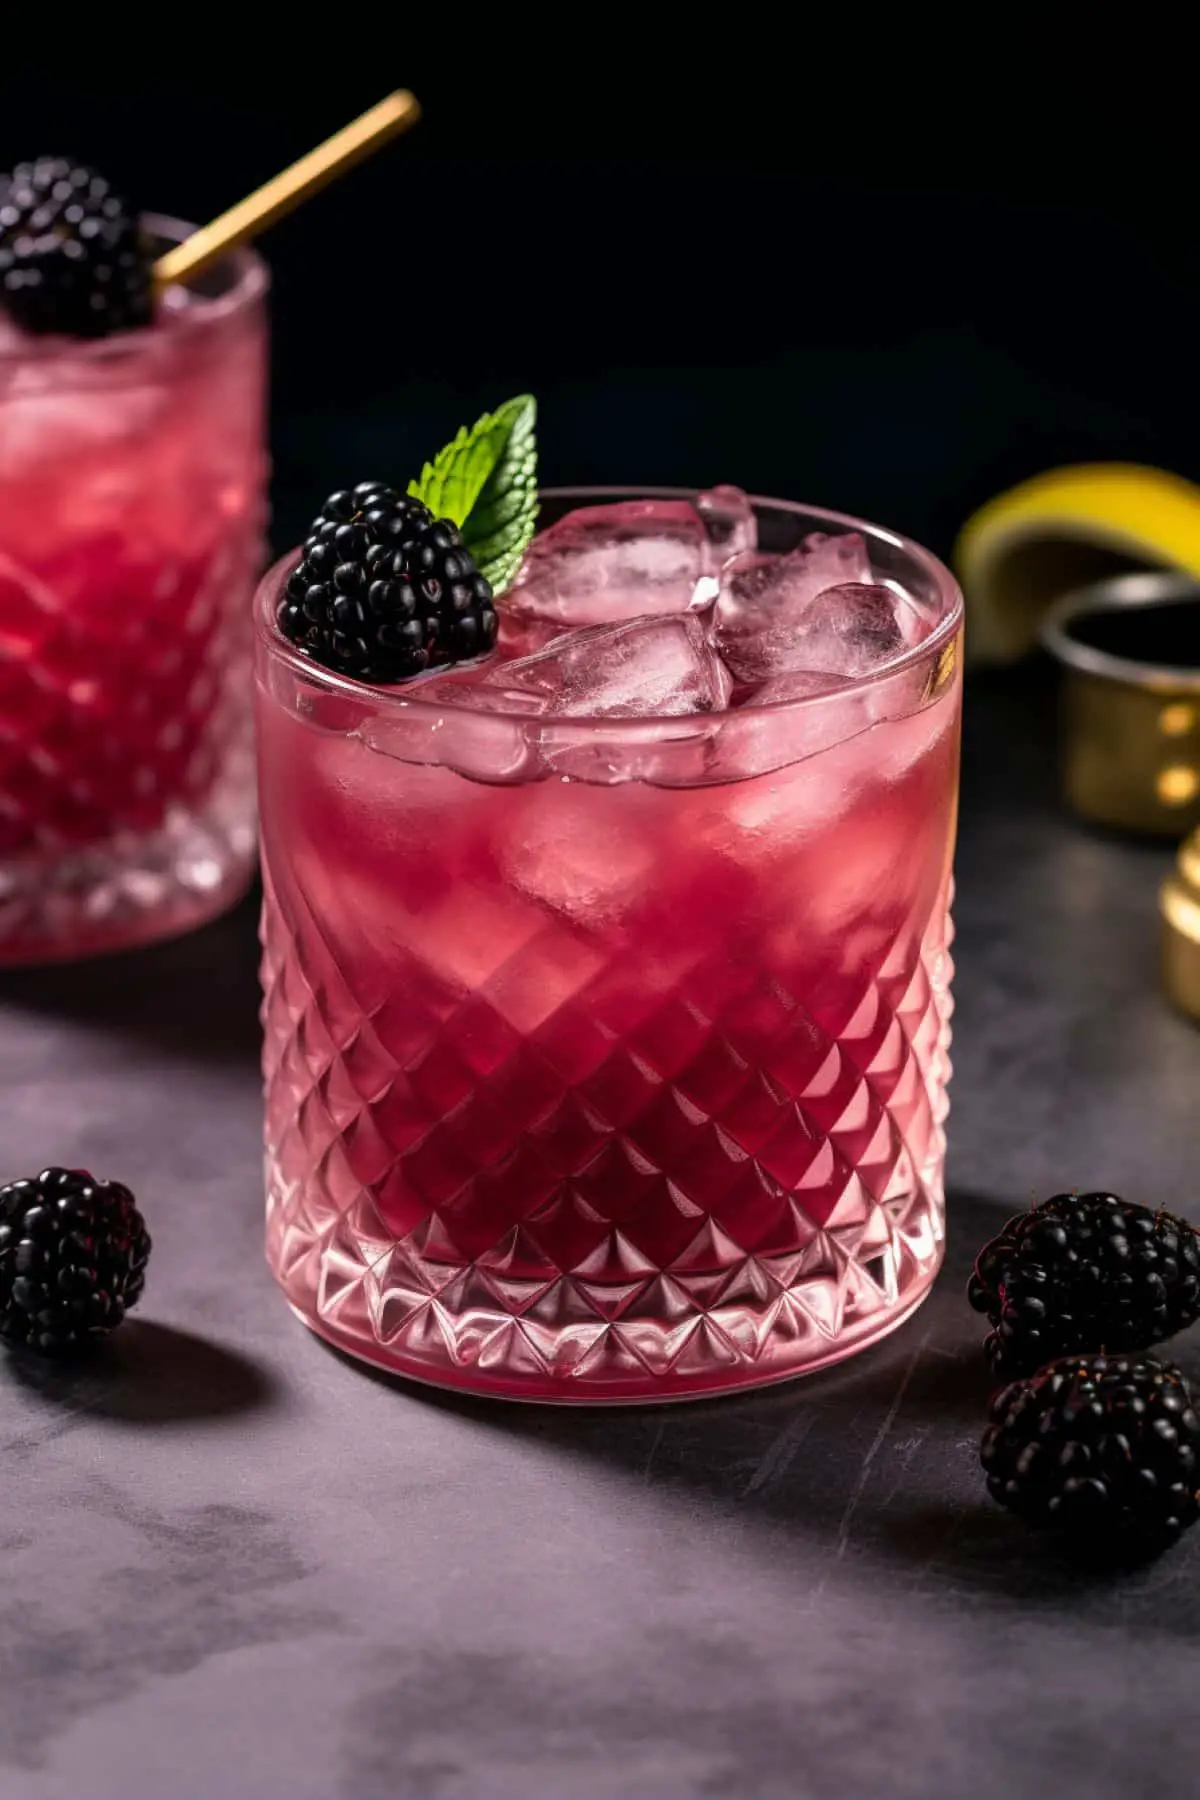 A blackberry gin cocktail.